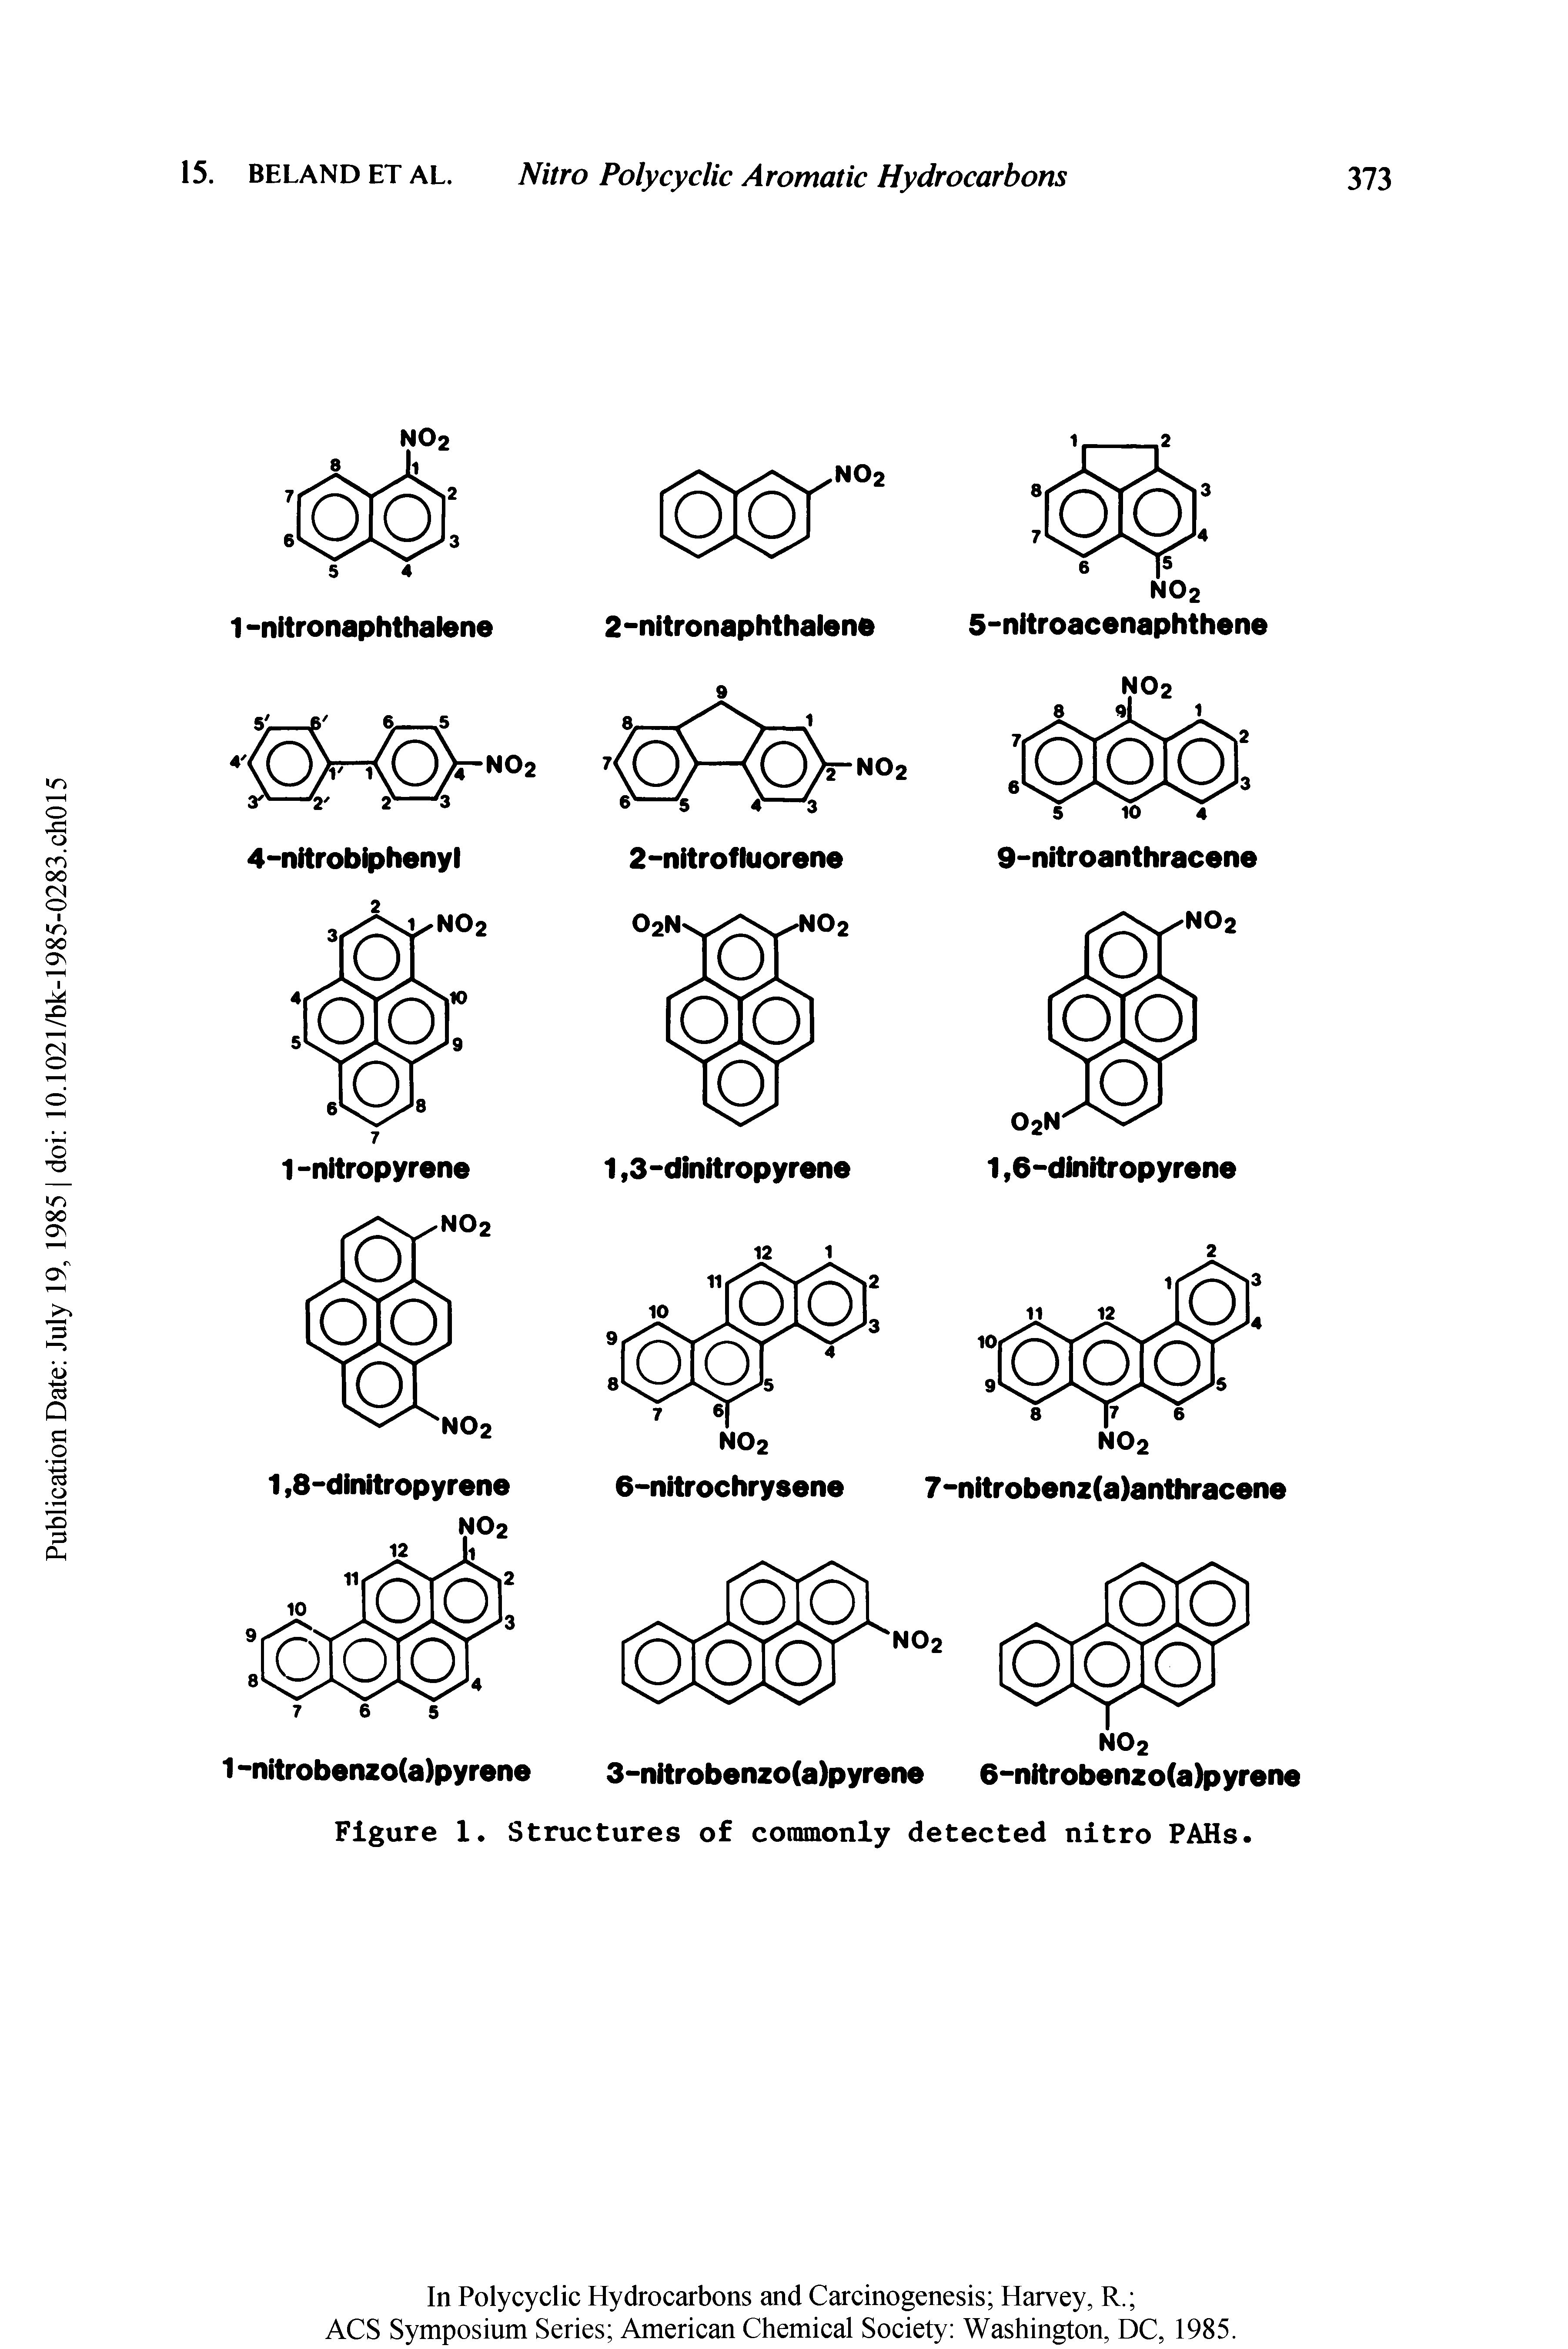 Figure 1. Structures of commonly detected nitro PAHs.